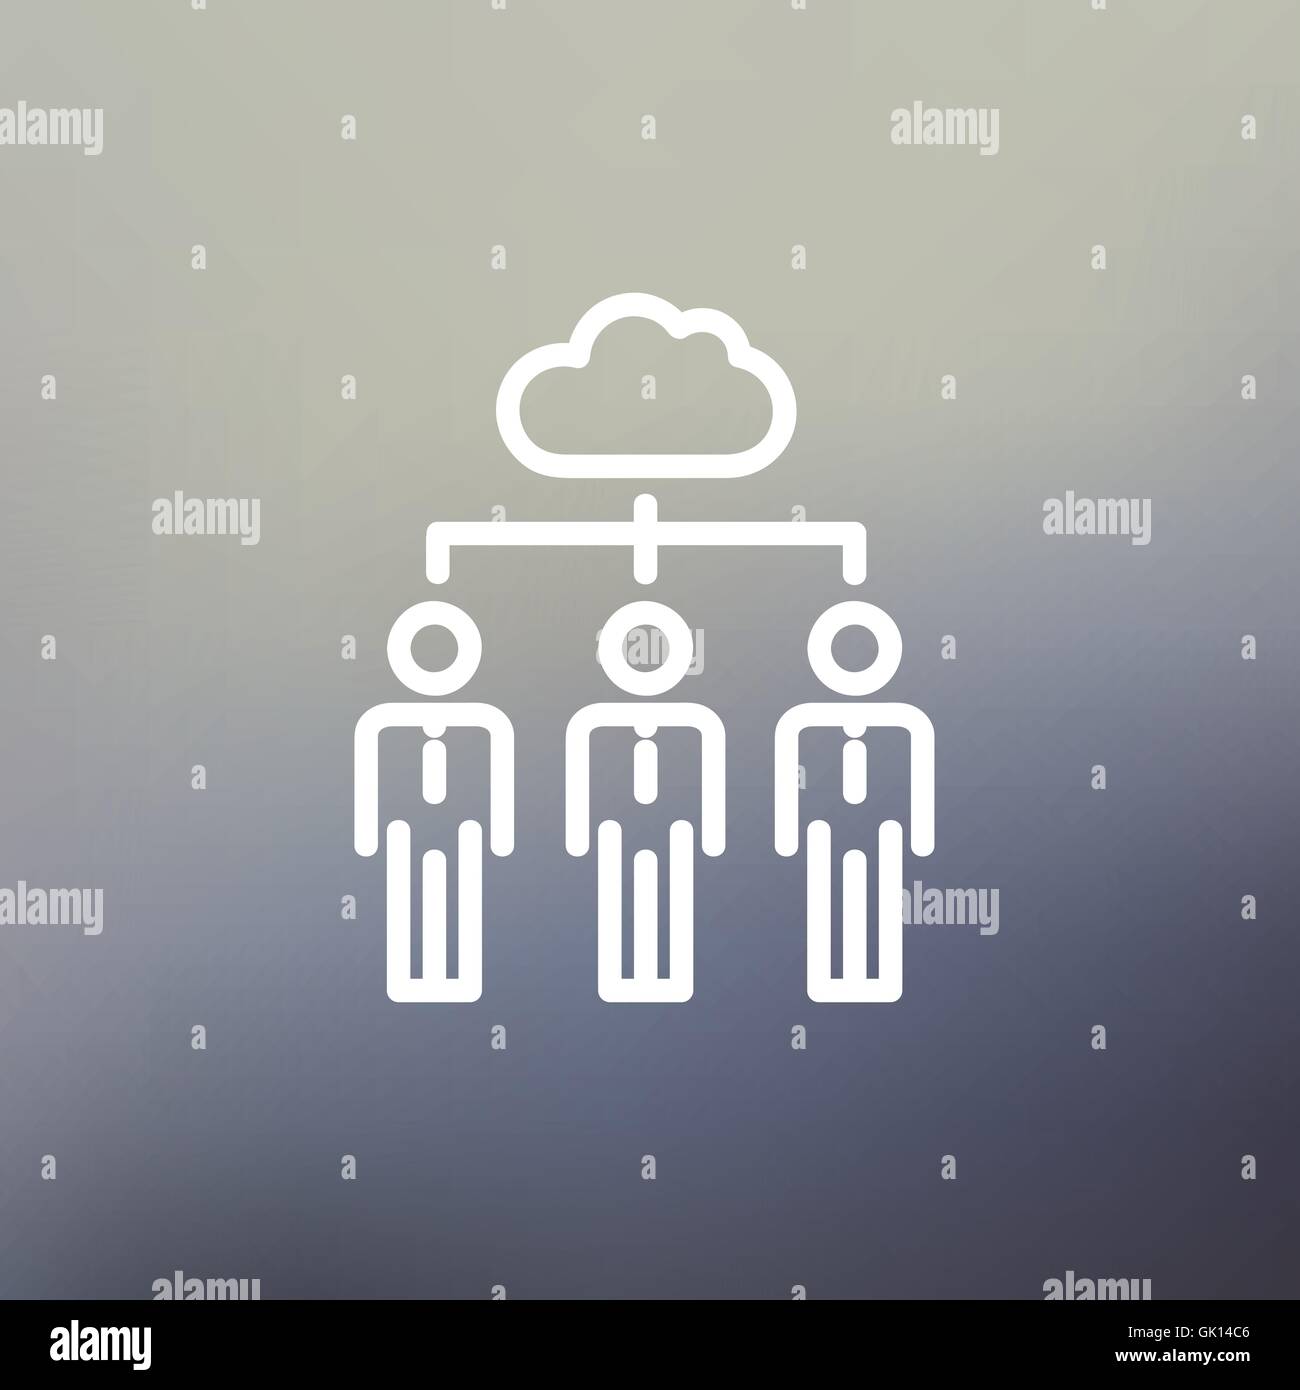 Three businessmen under the cloud thin line icon Stock Vector